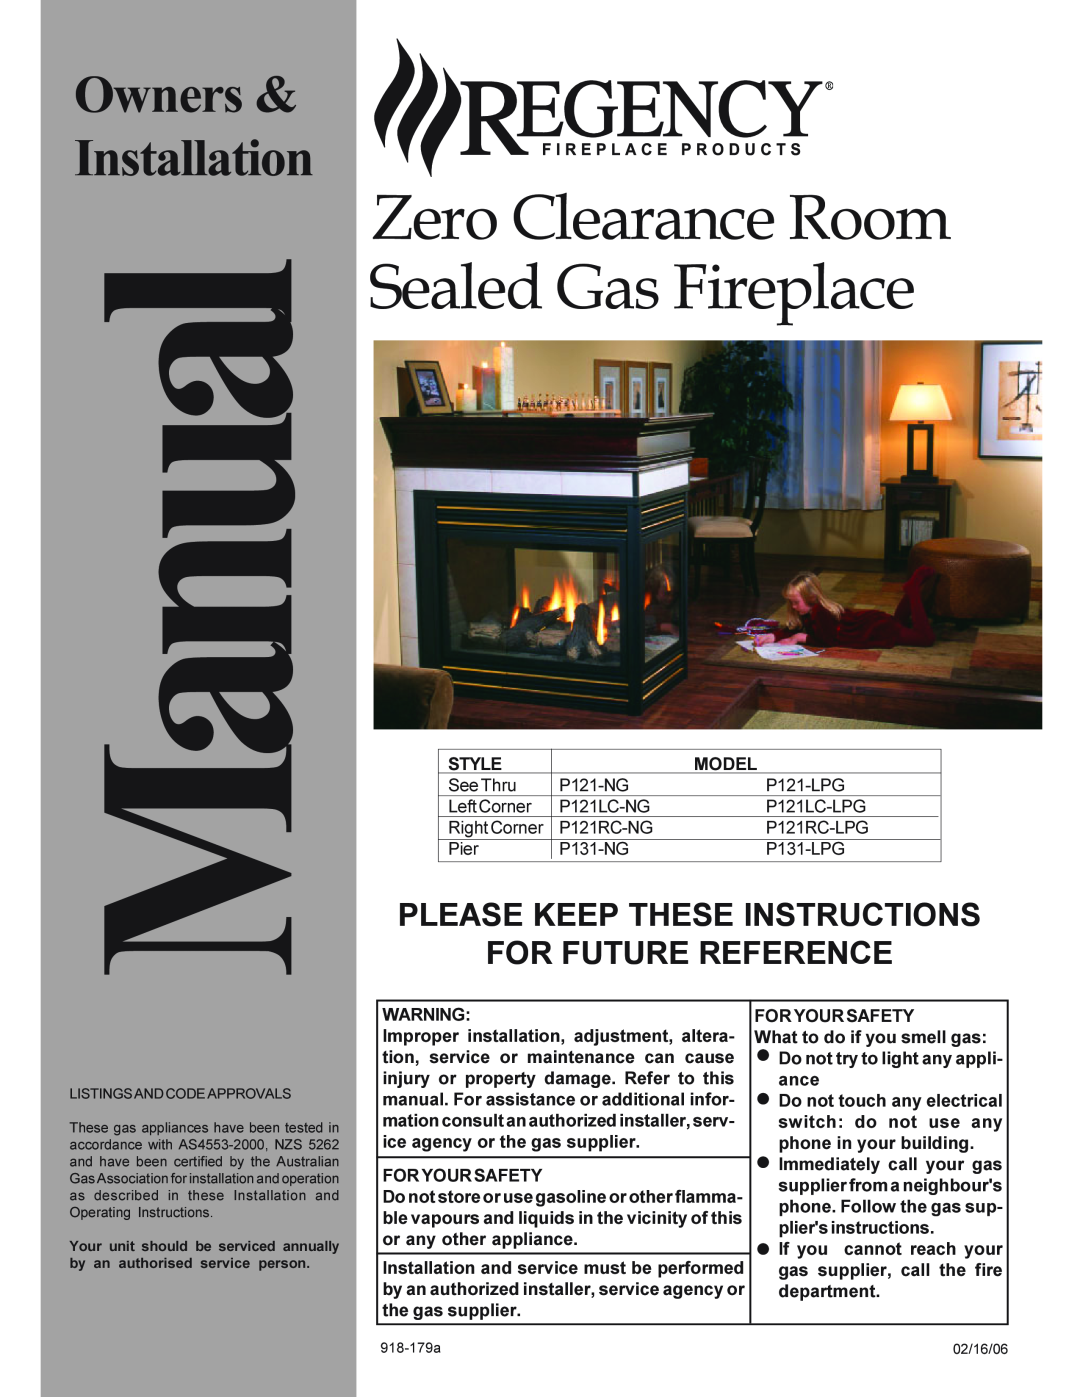 Regency P121LC-NG installation manual Manual, Zero Clearance Room Sealed Gas Fireplace, Owners & Installation, Style 